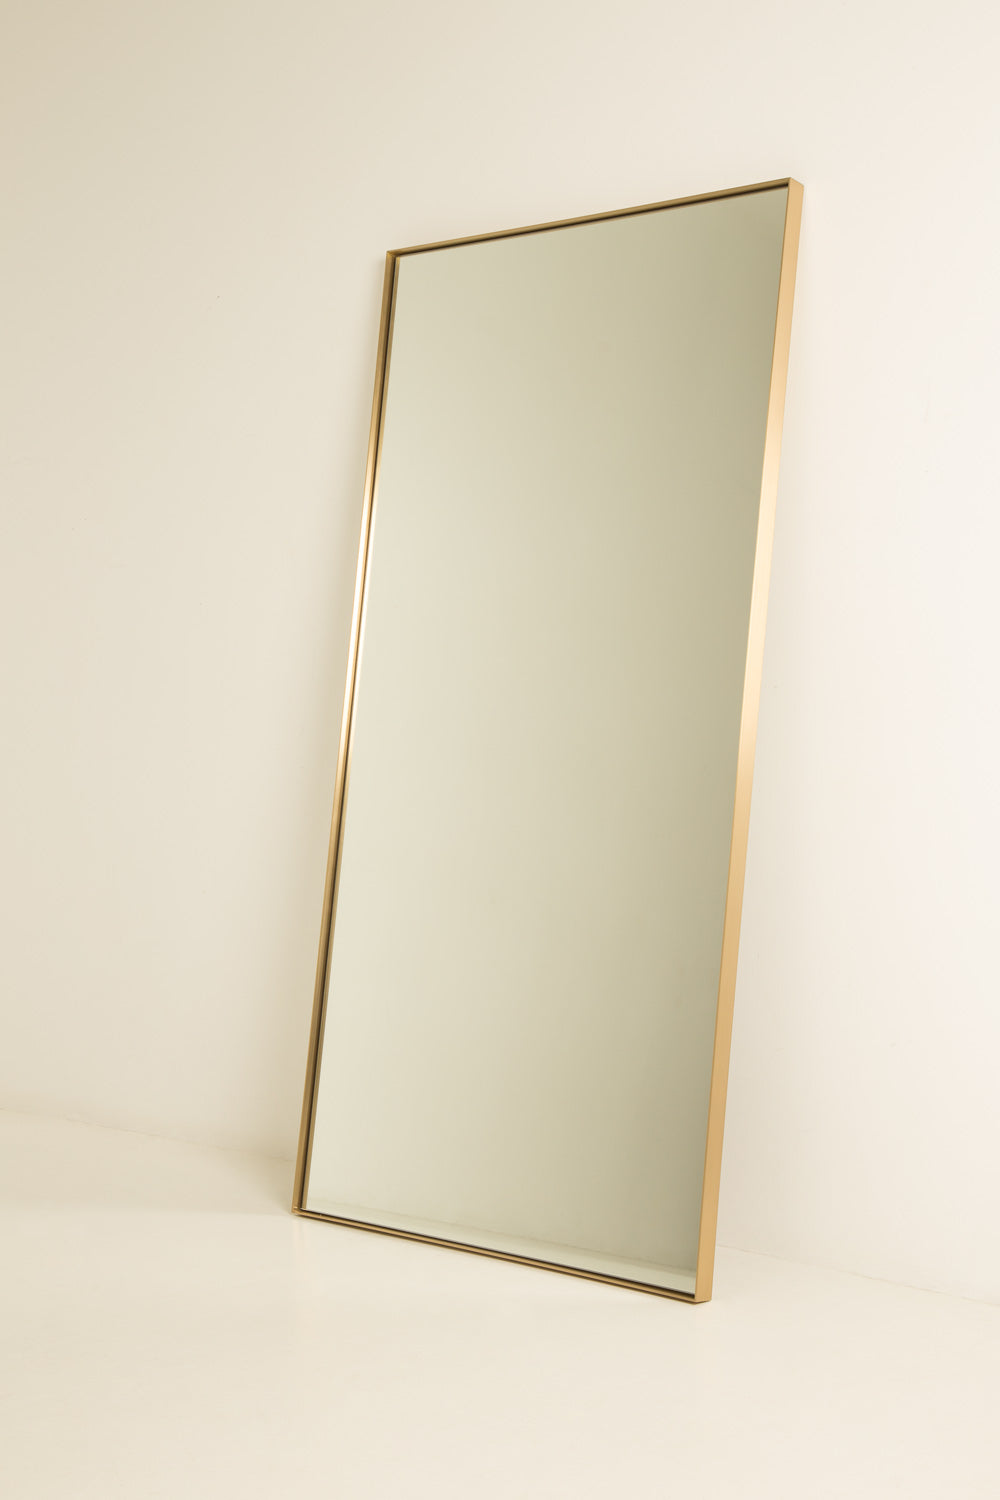 Place Mirror Sample - 700 x 1100mm - Aged Brass